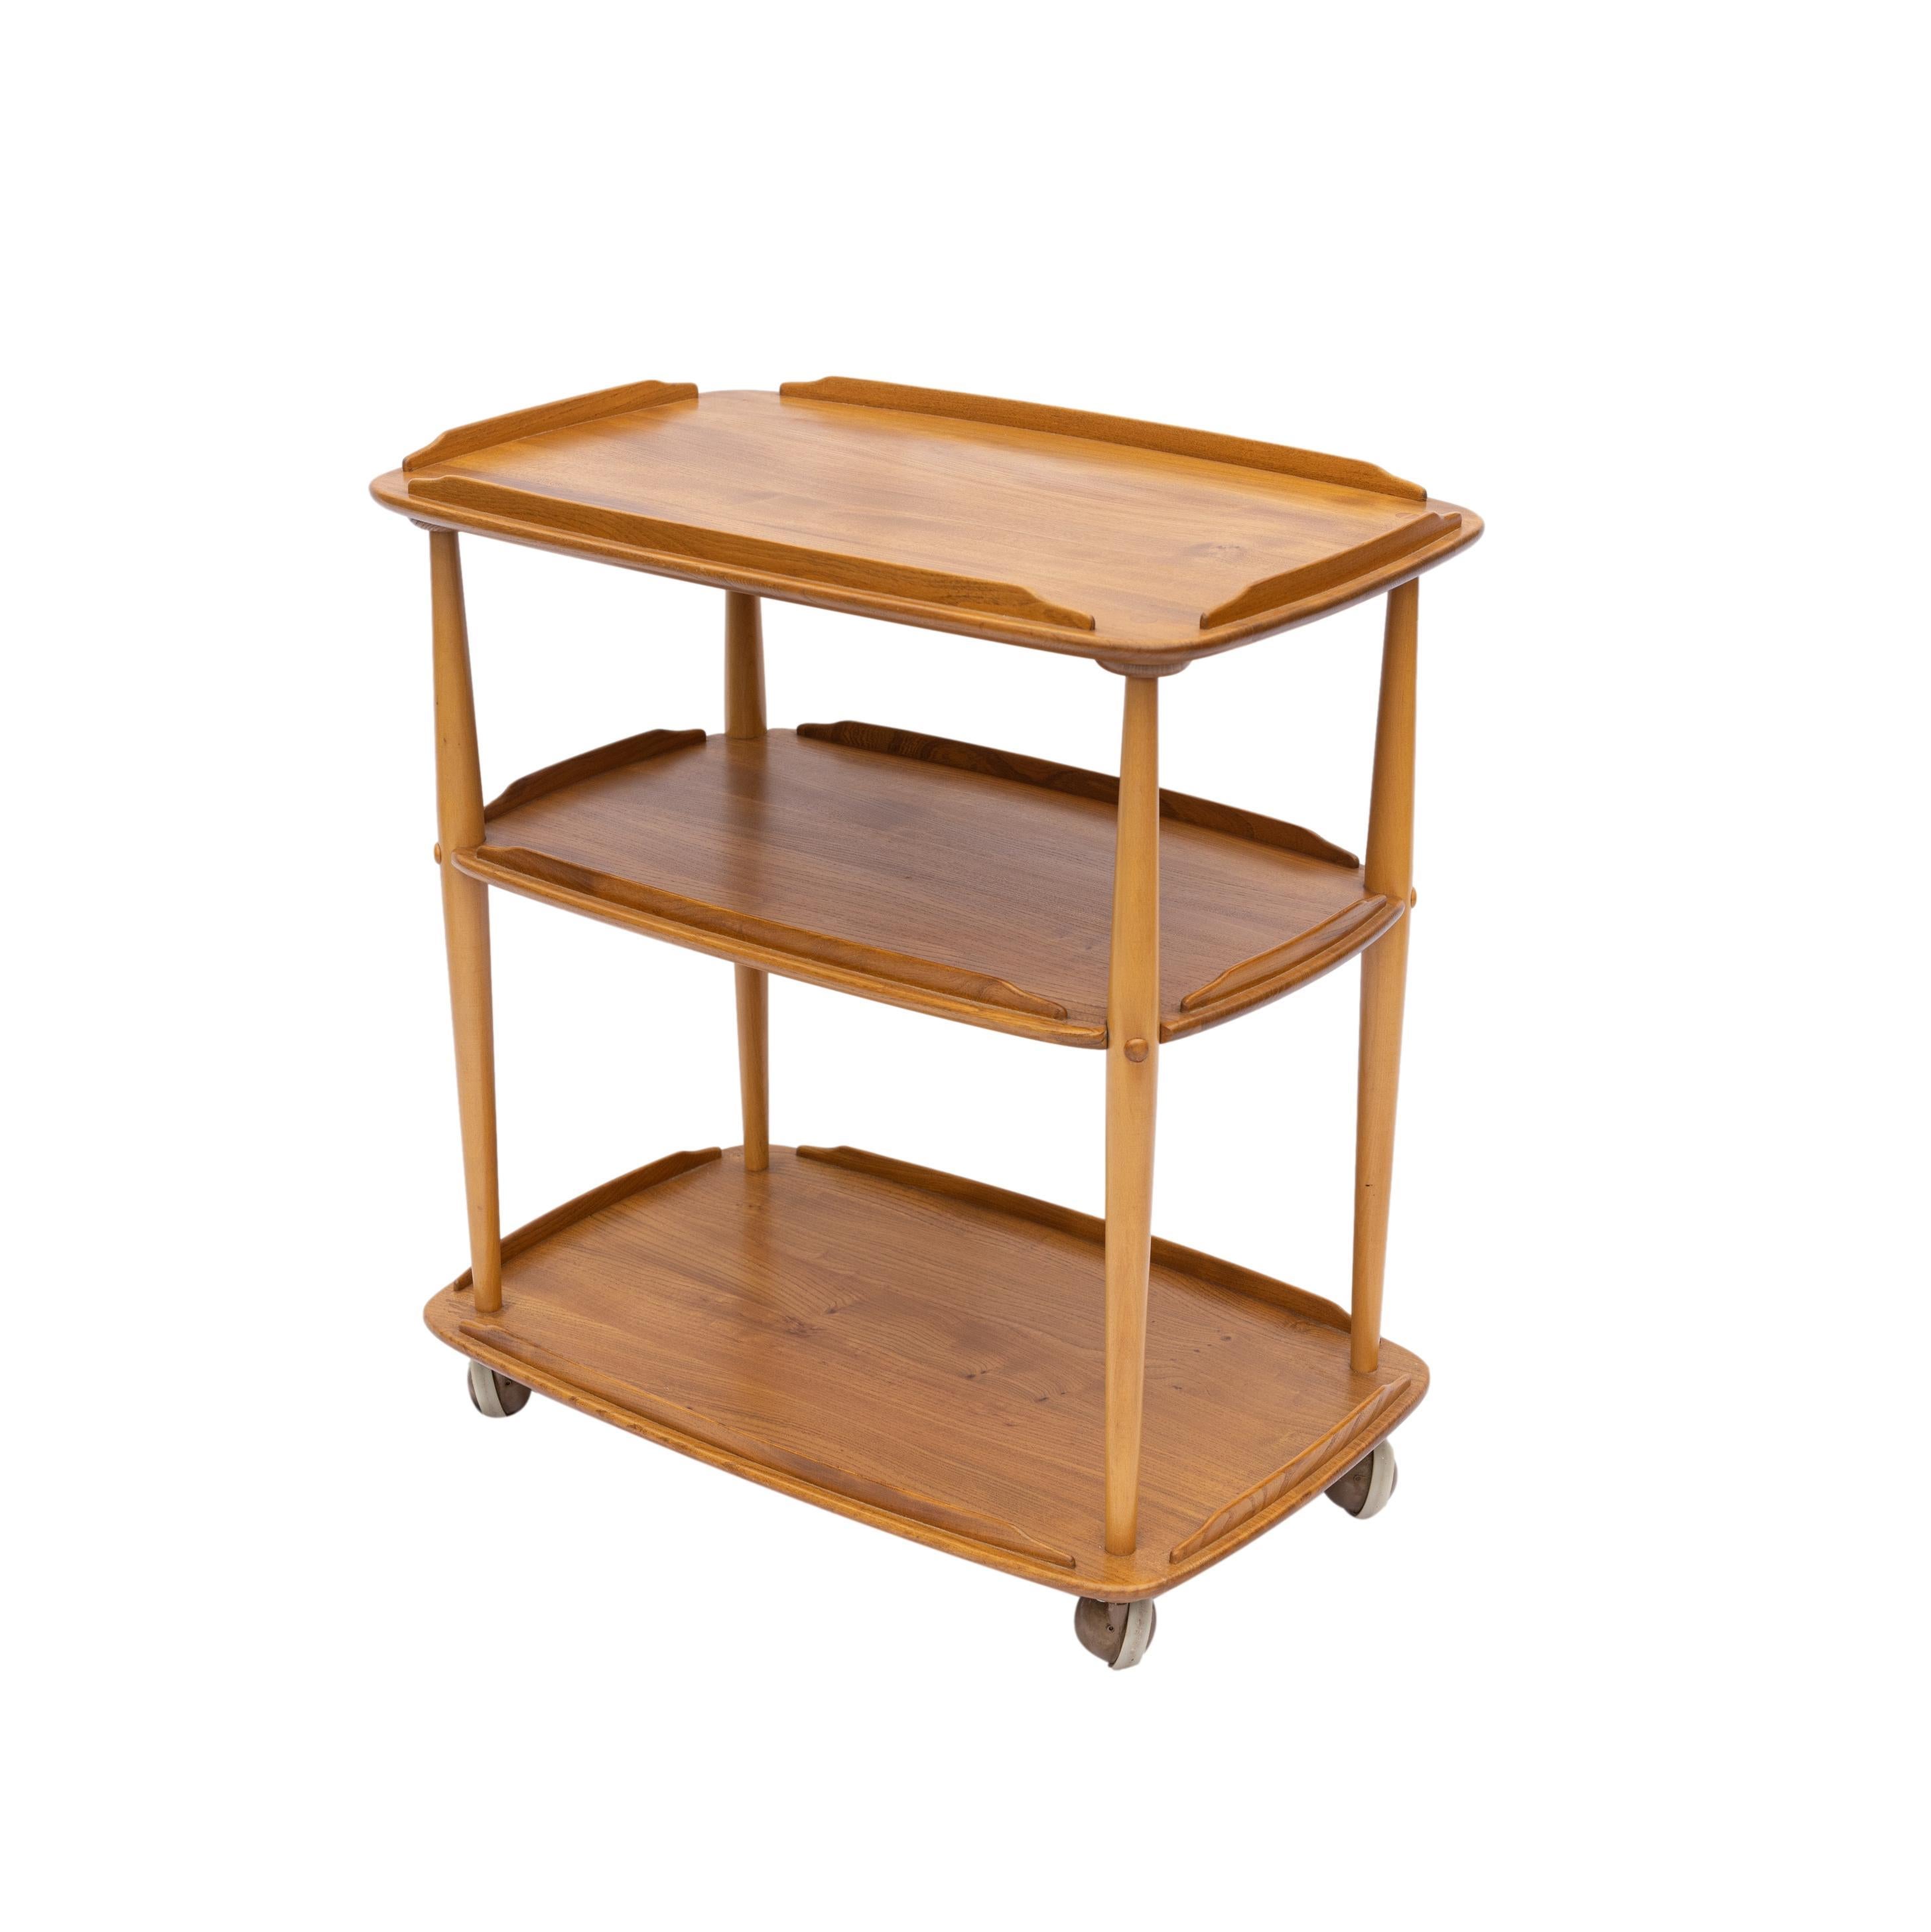 20th Century Mid-Century Modern Ercol Elm and Beech Bar Cart Designed by Lucian Ercolani For Sale